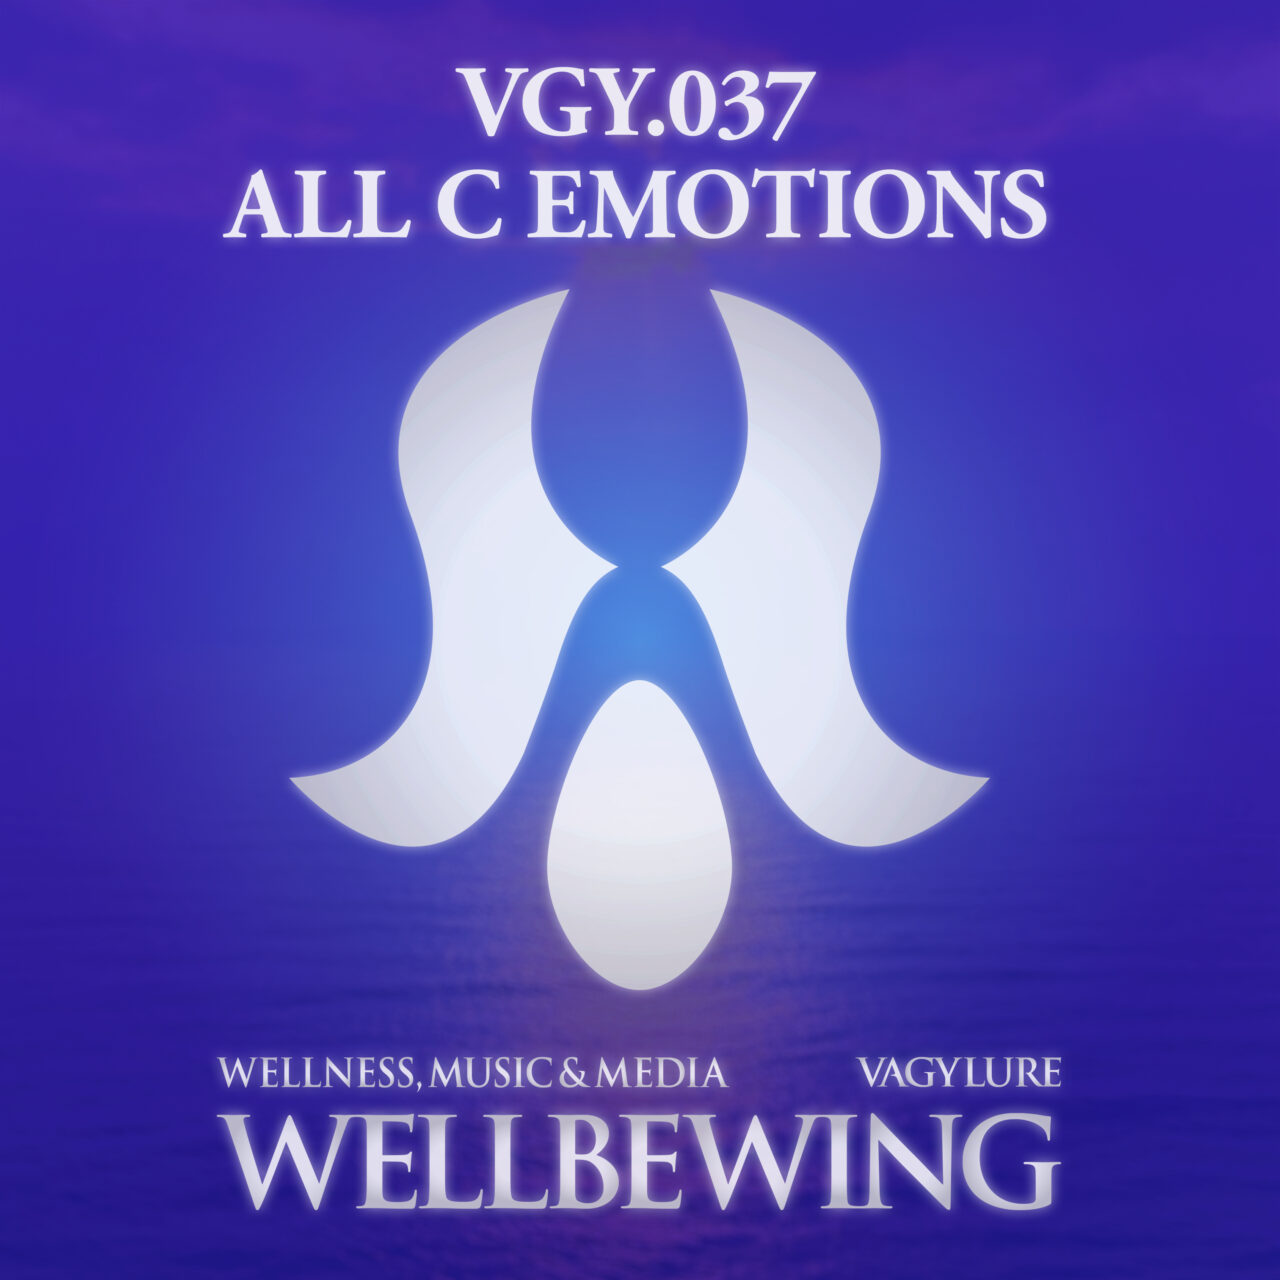 VGY.037 ALL C EMOTIONS, As YOGA Music, WELLBEWING®︎ Wellness Music and Media Label, Wellbeing: Healing music for yoga, meditation, and mindfulness. Official yoga tracks of Yogini Style. We offer music that incorporates Solfeggio frequencies and tunes to balance chakras. Supervised by YOGINI STYLE®. Official Brand of VAGYLURE® Inc. Produced by Gaku MIURA. ヨガ音楽といえばWELLBEWING®︎ ウェルネス ミュージック アンド メディアレーベル、ウェルビーウイング。ヨガや瞑想、マインドフルネスのための癒しの音楽を提供します。ソルフェジオ周波数を取り入れた楽曲や、チャクラを整えるための音楽も揃えたヨギーニスタイル公式ヨガ曲。